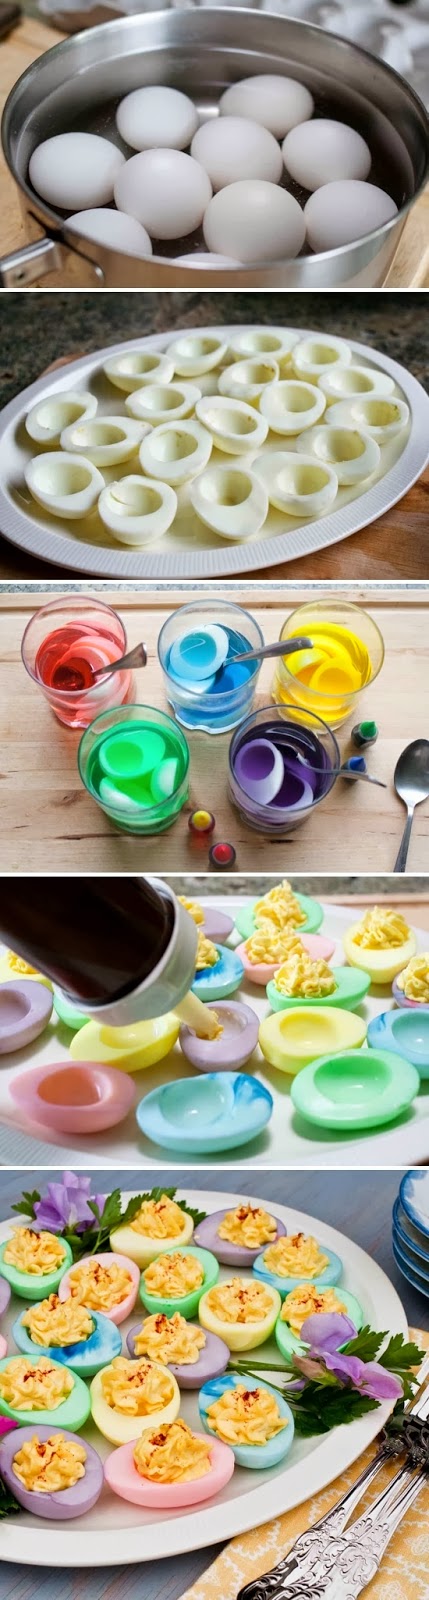 How To Make Colorful Easter Eggs 